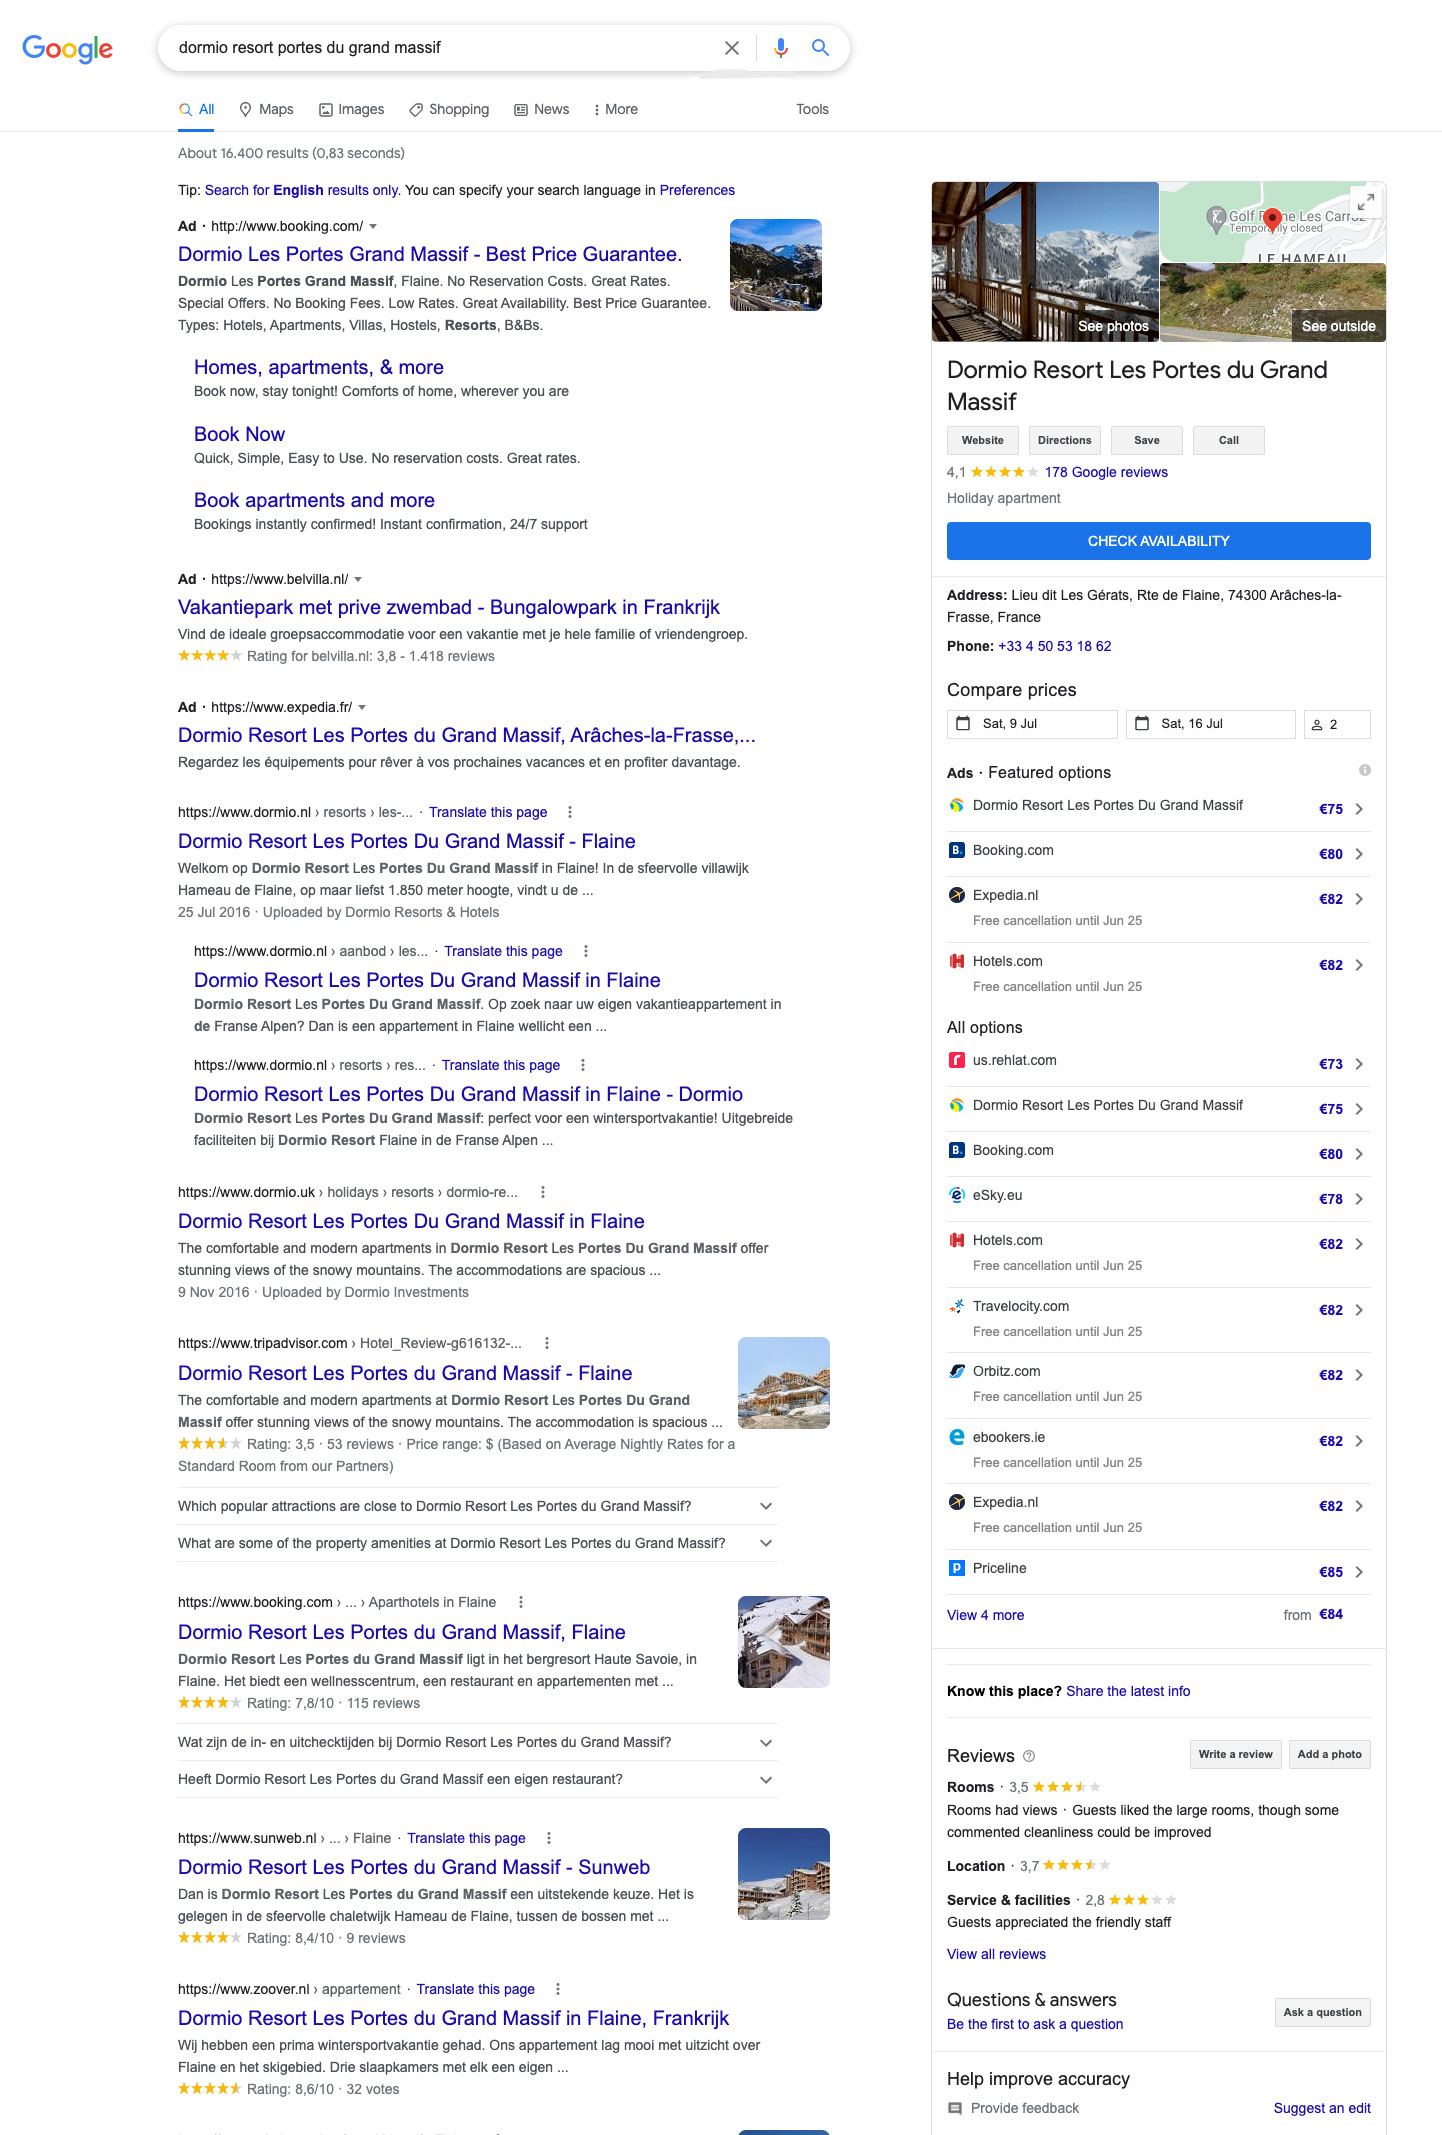 Example of Hotel Ads after a specific search for a hotel in Google